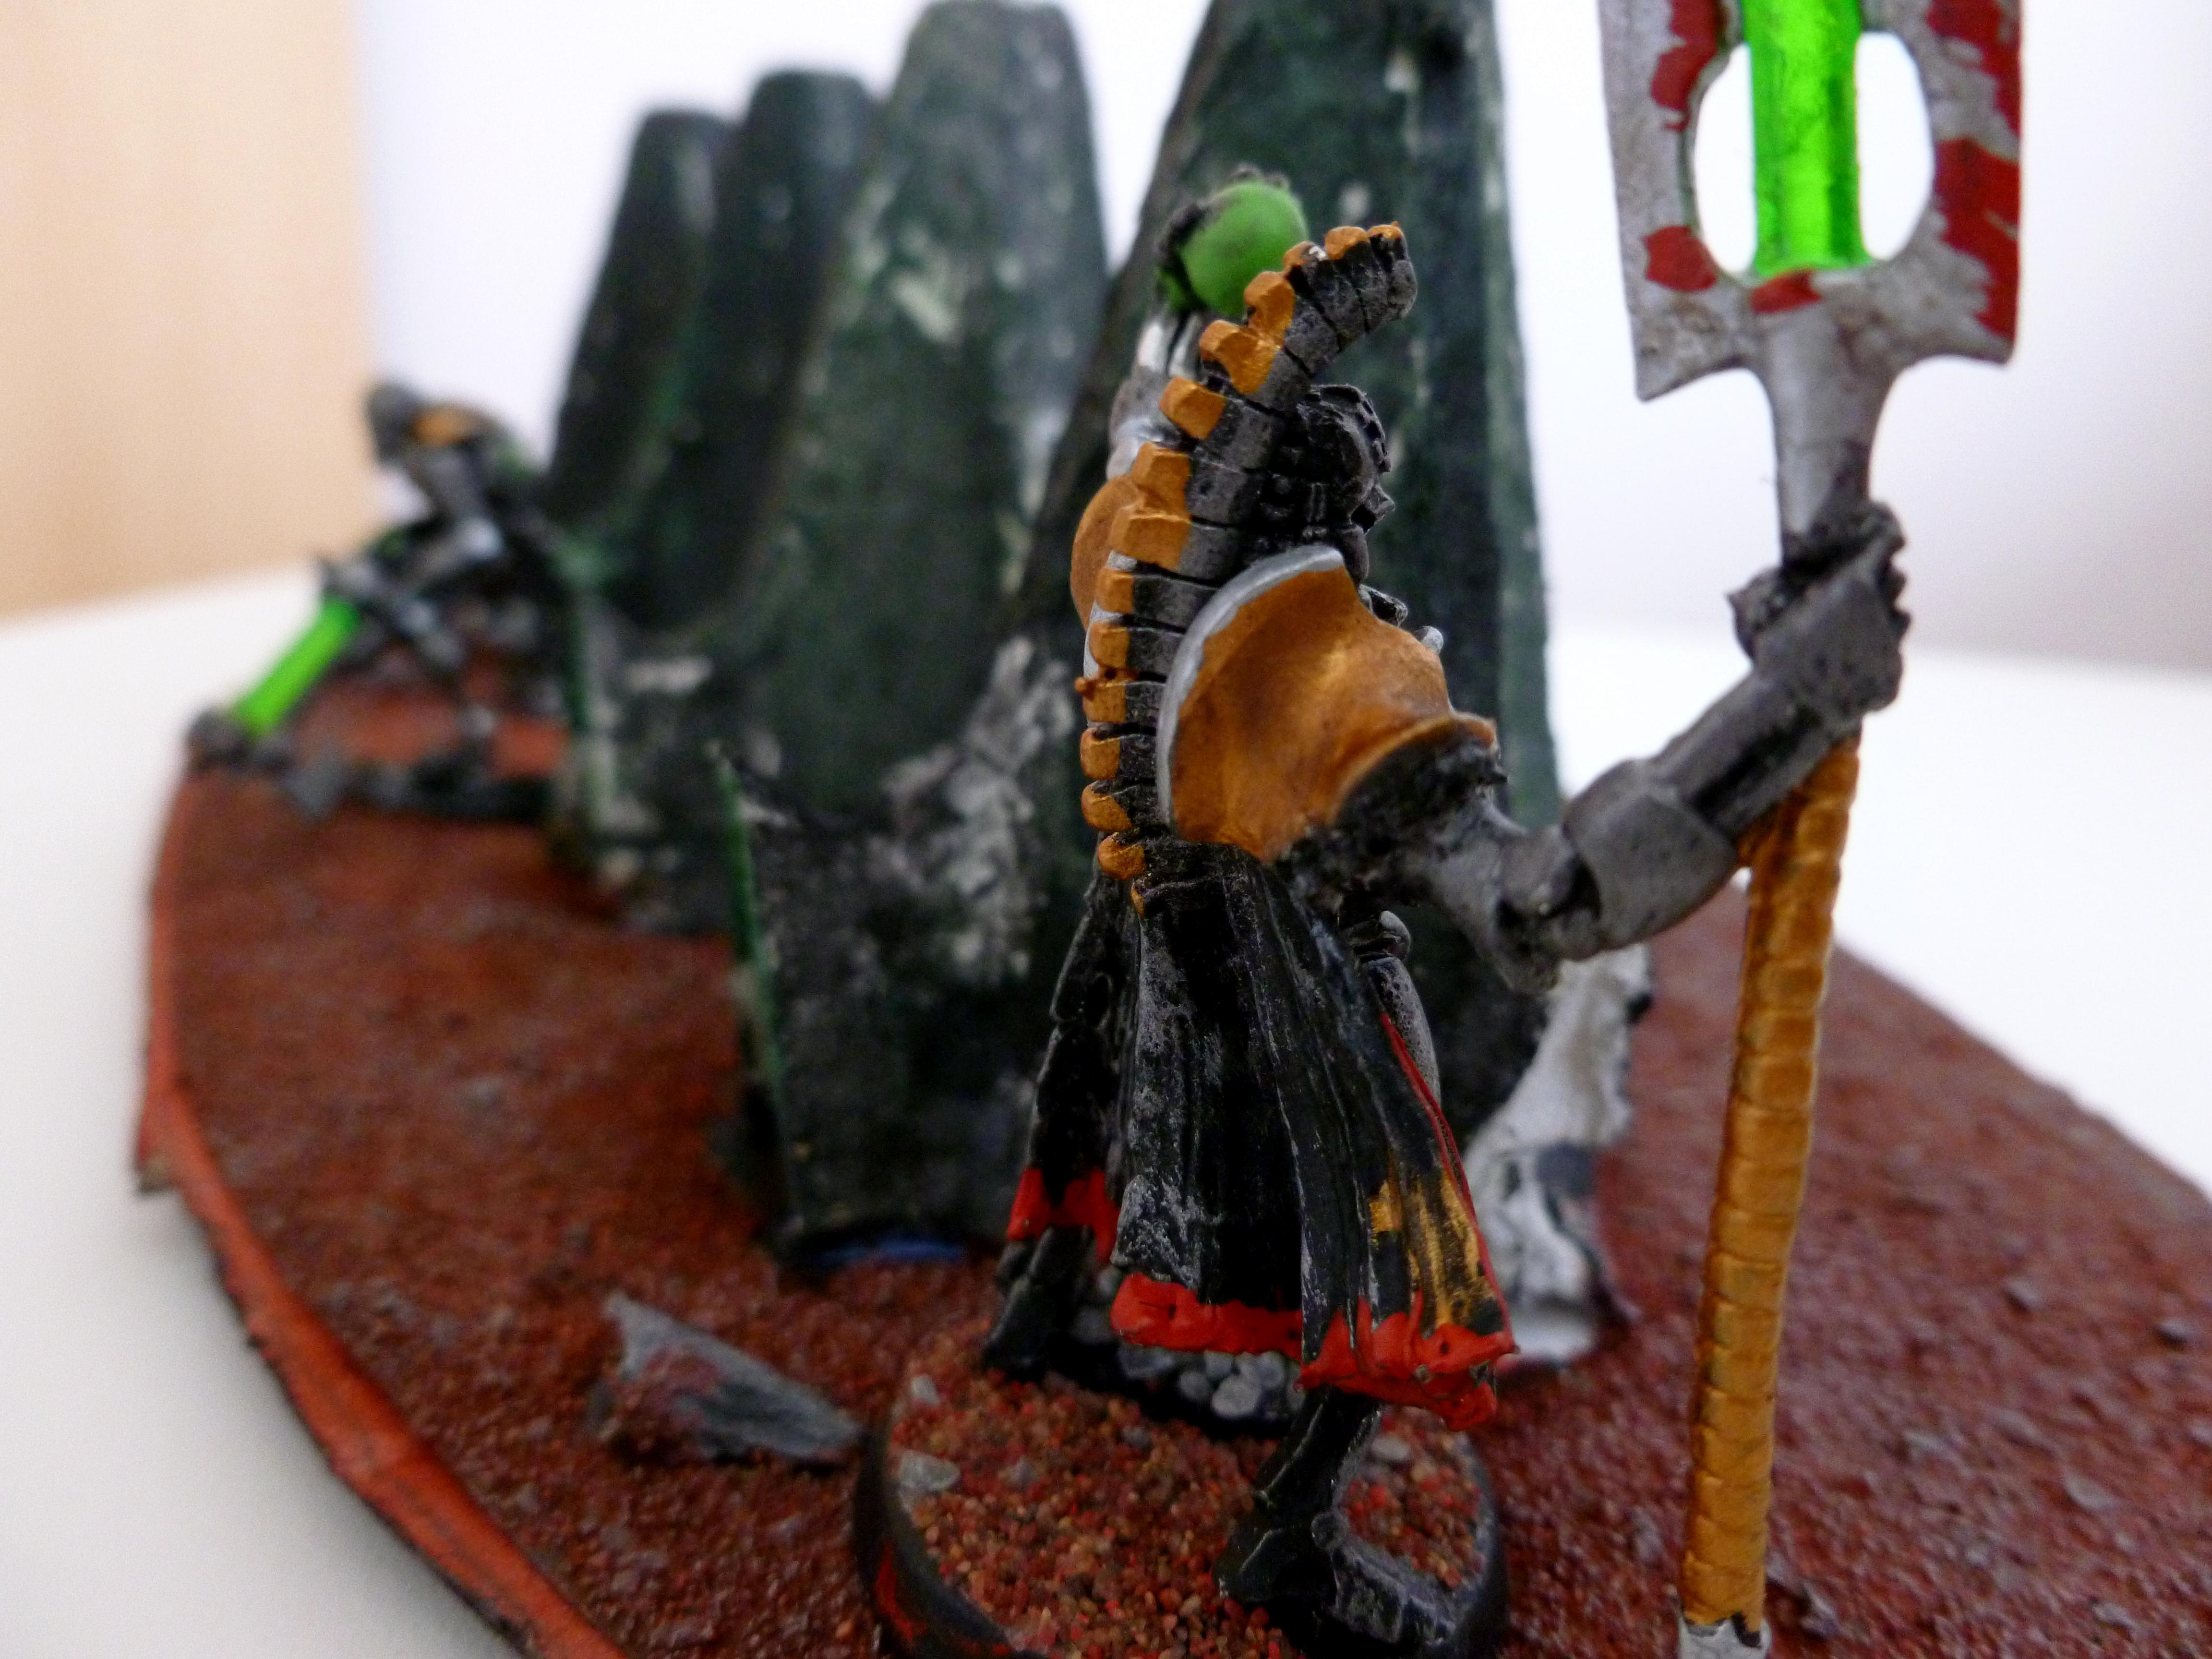 Ancient, Black, Desert, First, Gold, Green, Grey, Living Metal, Necrons, New, Playing, Red, Sand, Stone, Tales, Toy, Toys